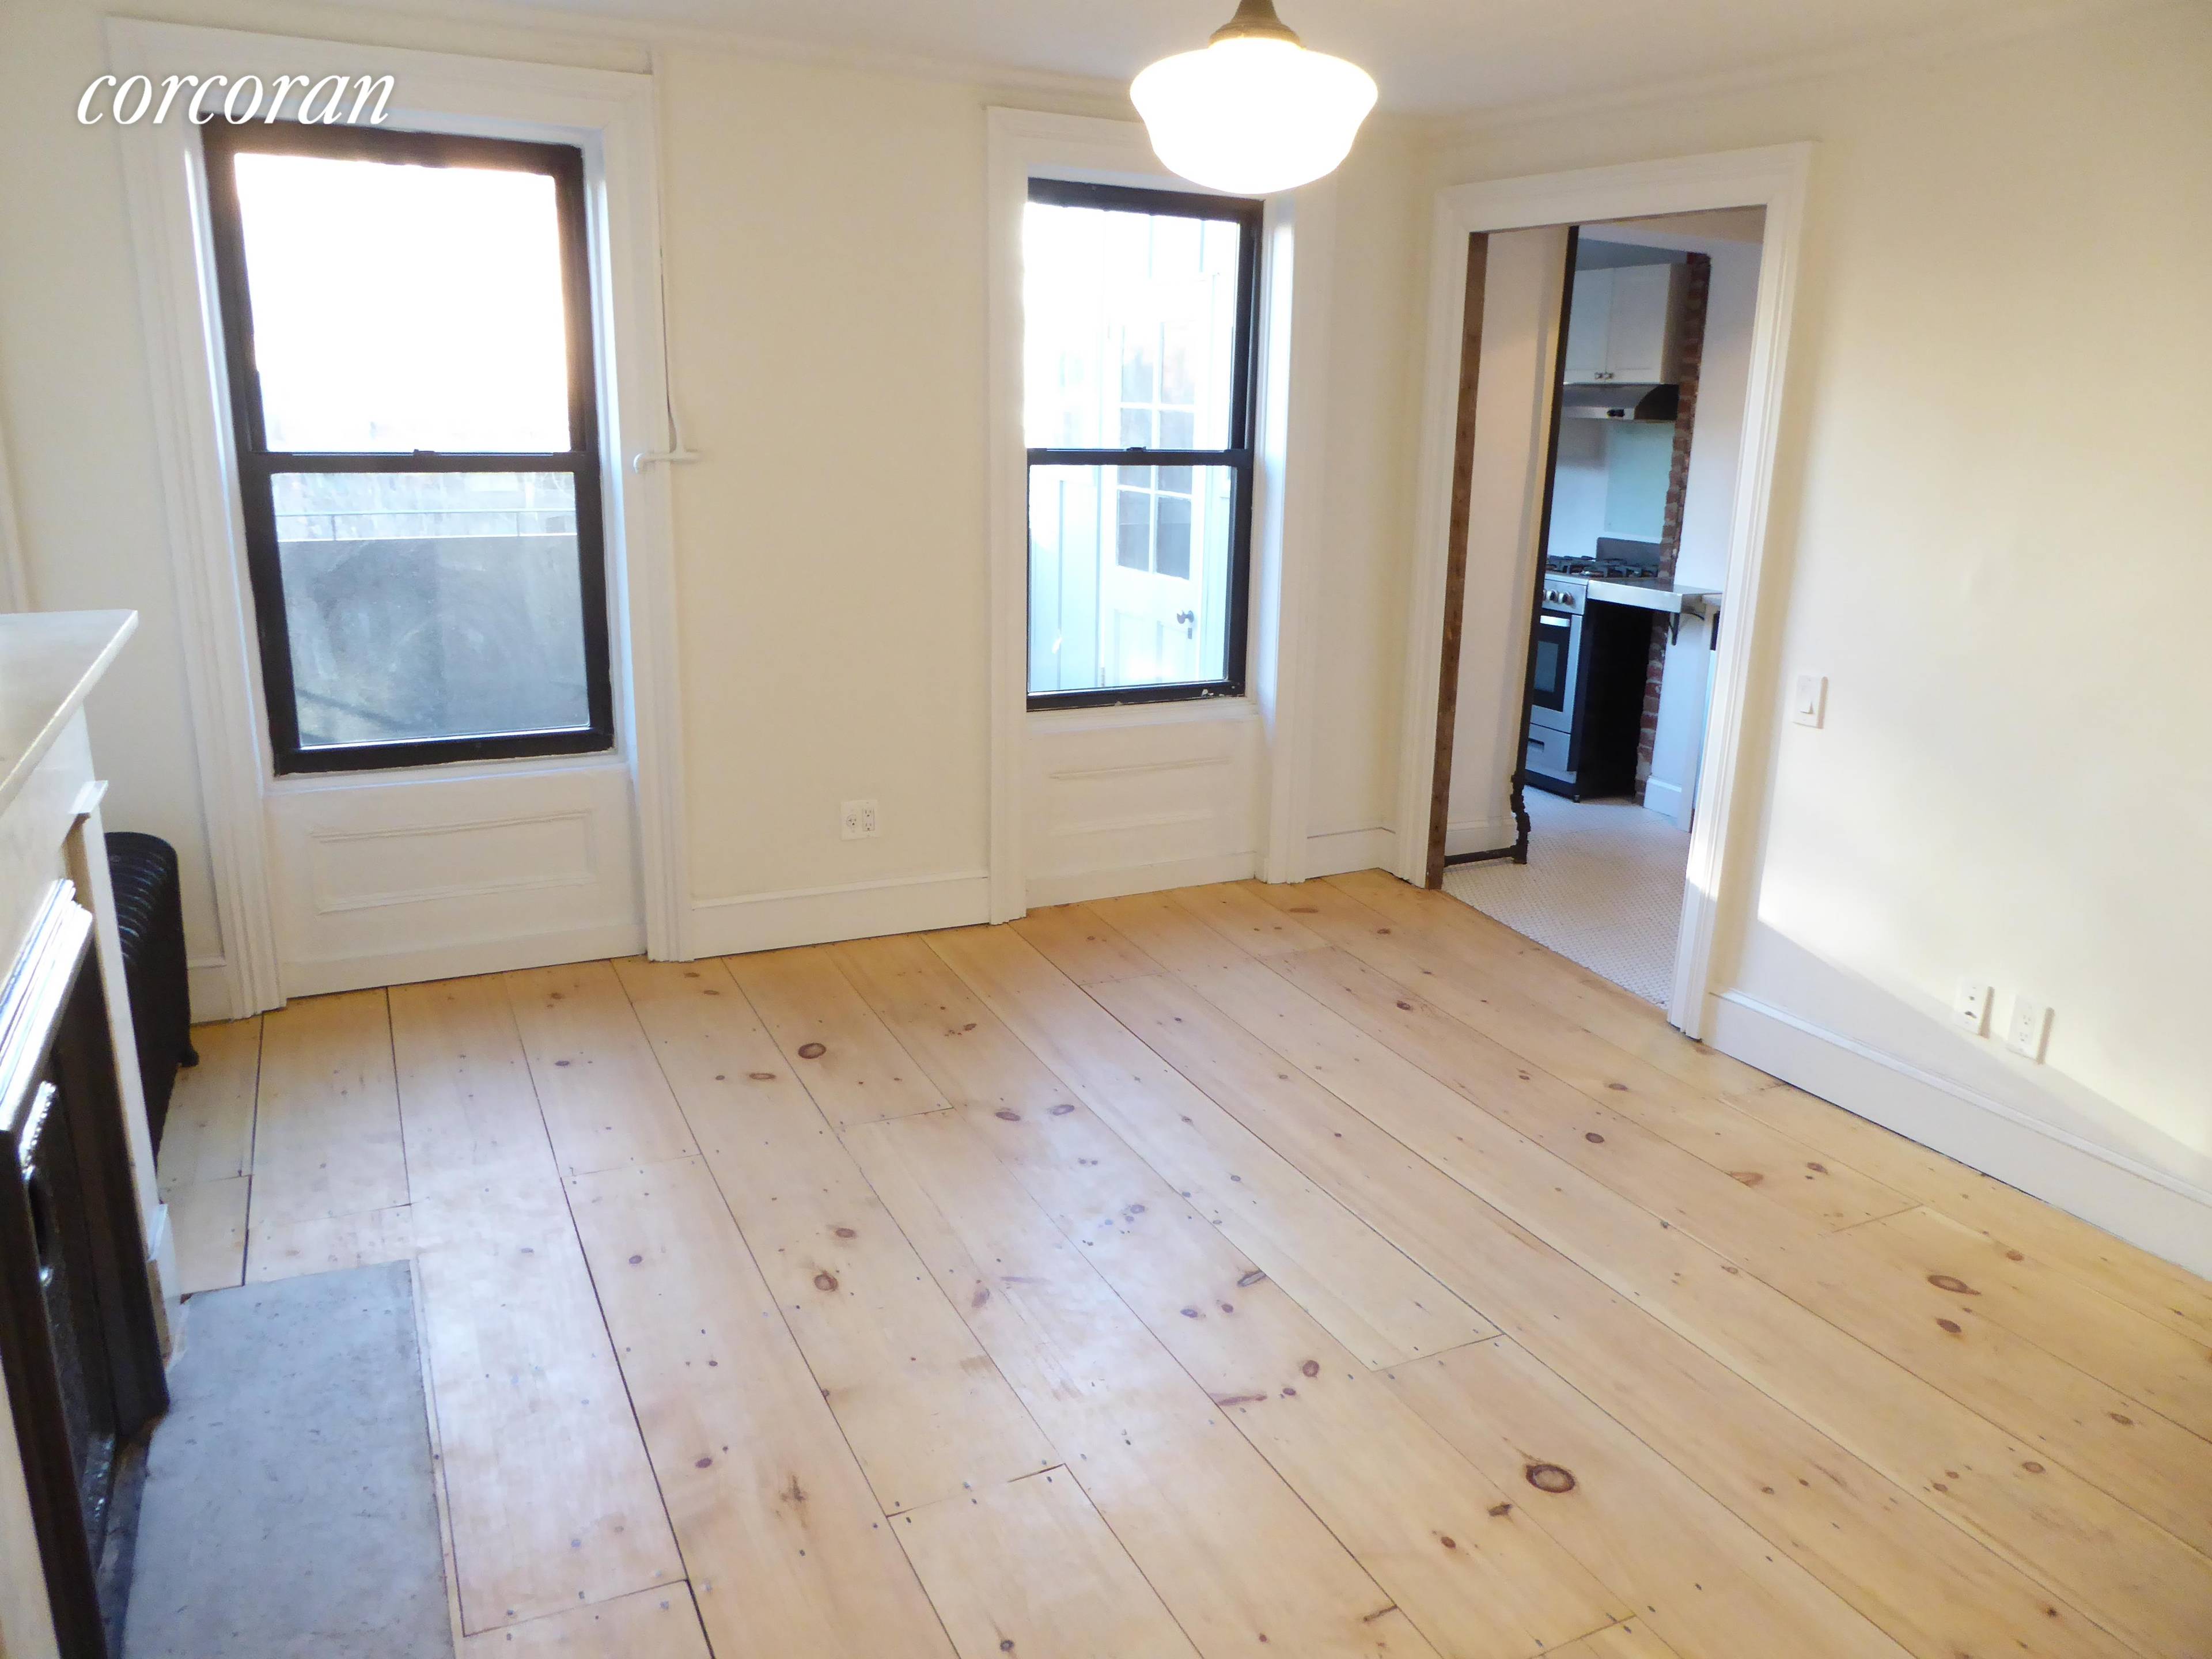 STUNNING 3. 5BR 1. 5BA DUPLEX WITH DW, W D, amp ; PVT OUTDOOR SPACE IN NORTH PARK SLOPE AVAILABLE AS A FURNISHED OR UNFURNISHED SUBLET A FLEXIBLE TERM 3 ...